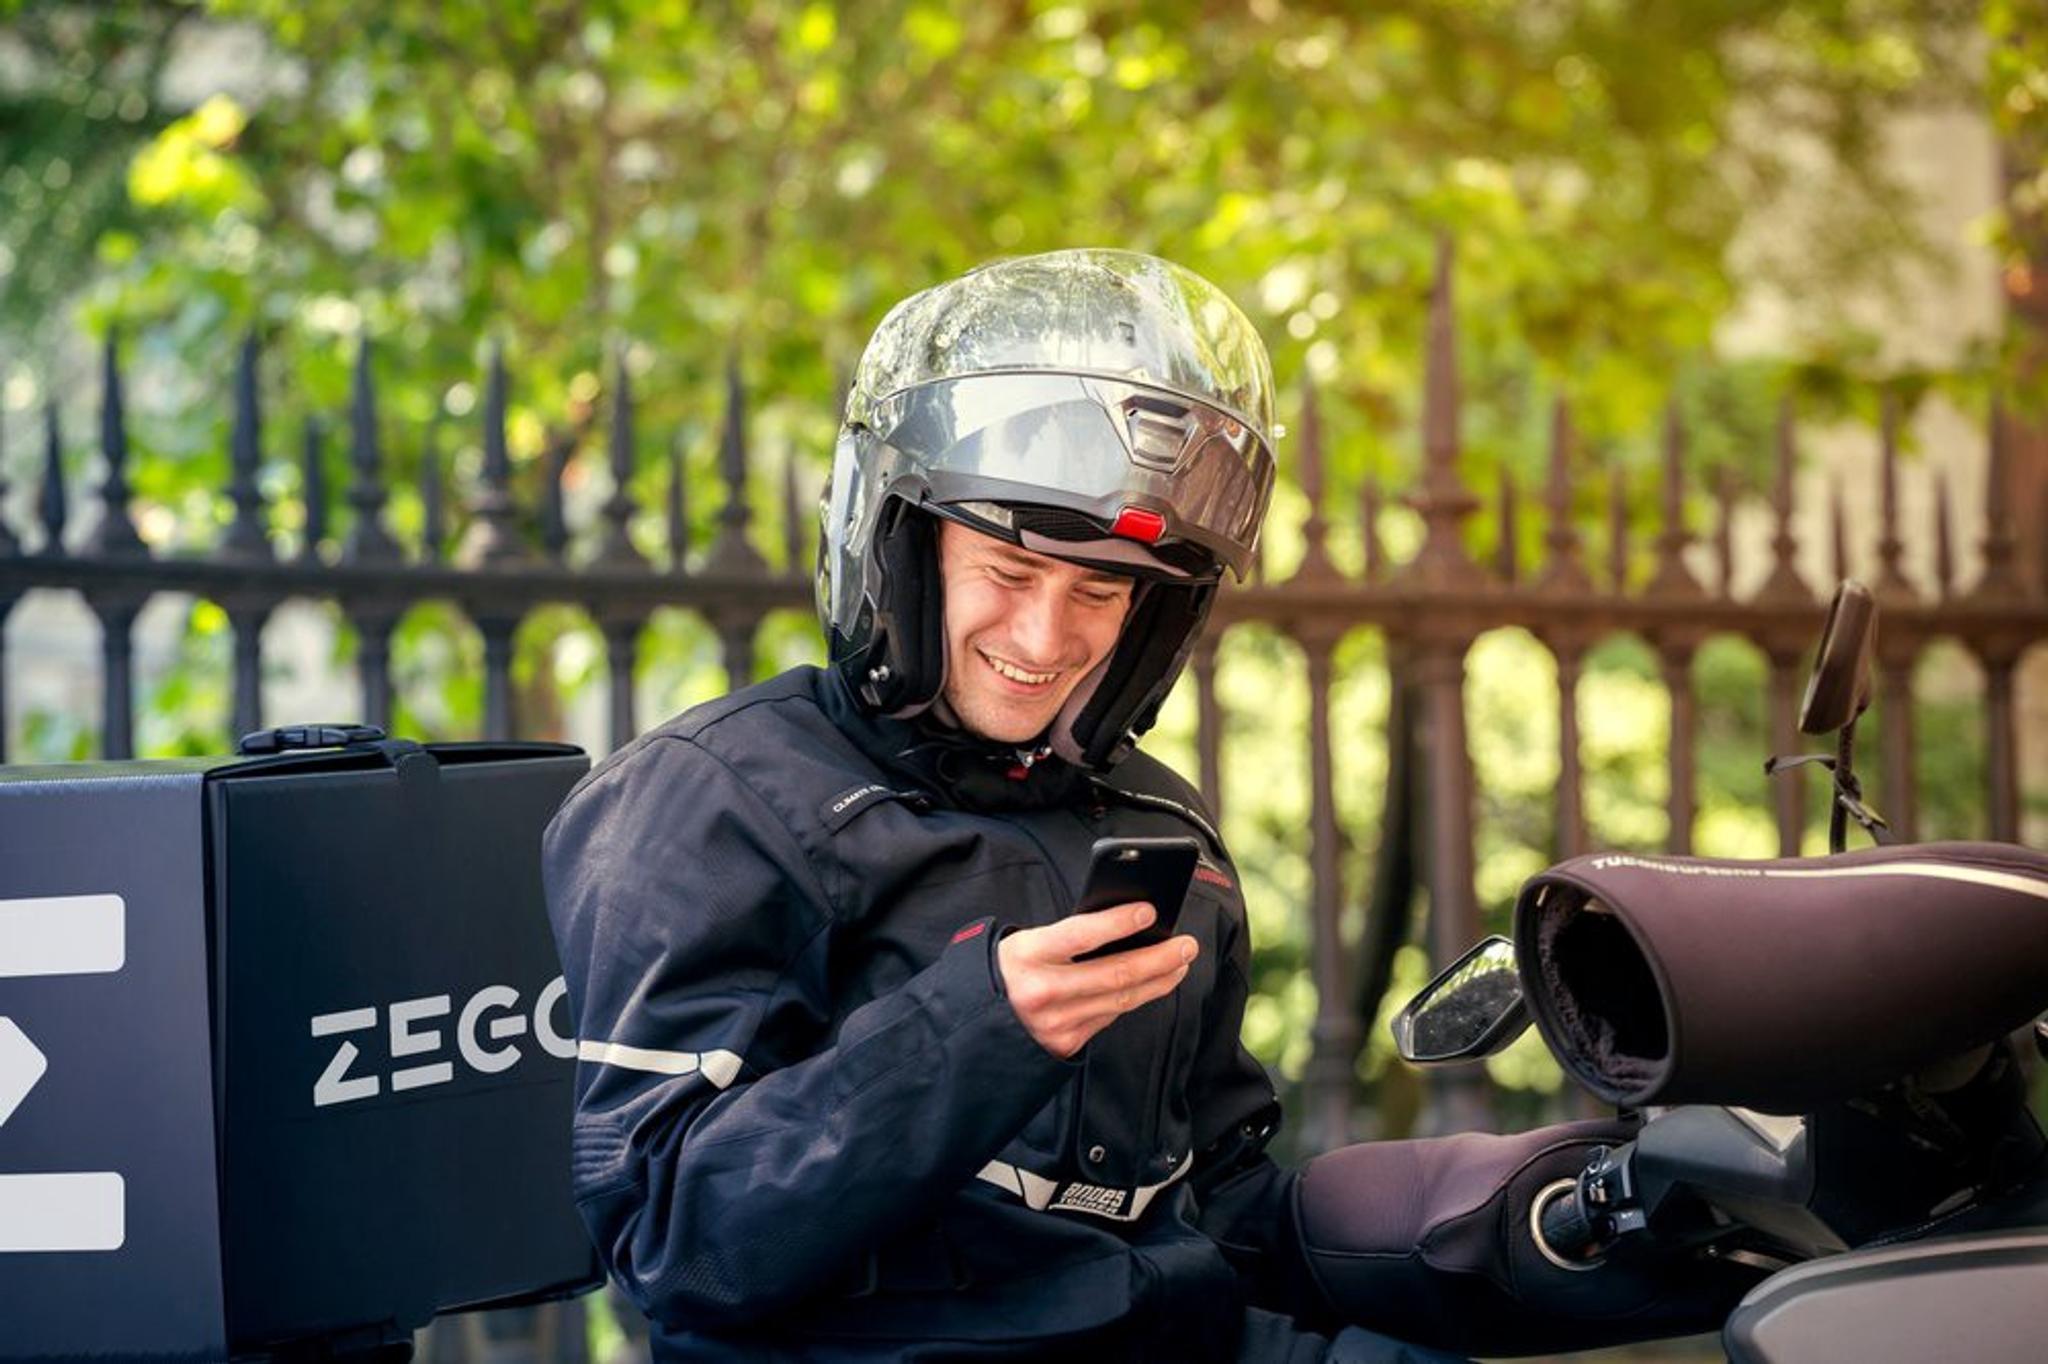 How to get a scooter insurance quote with Zego